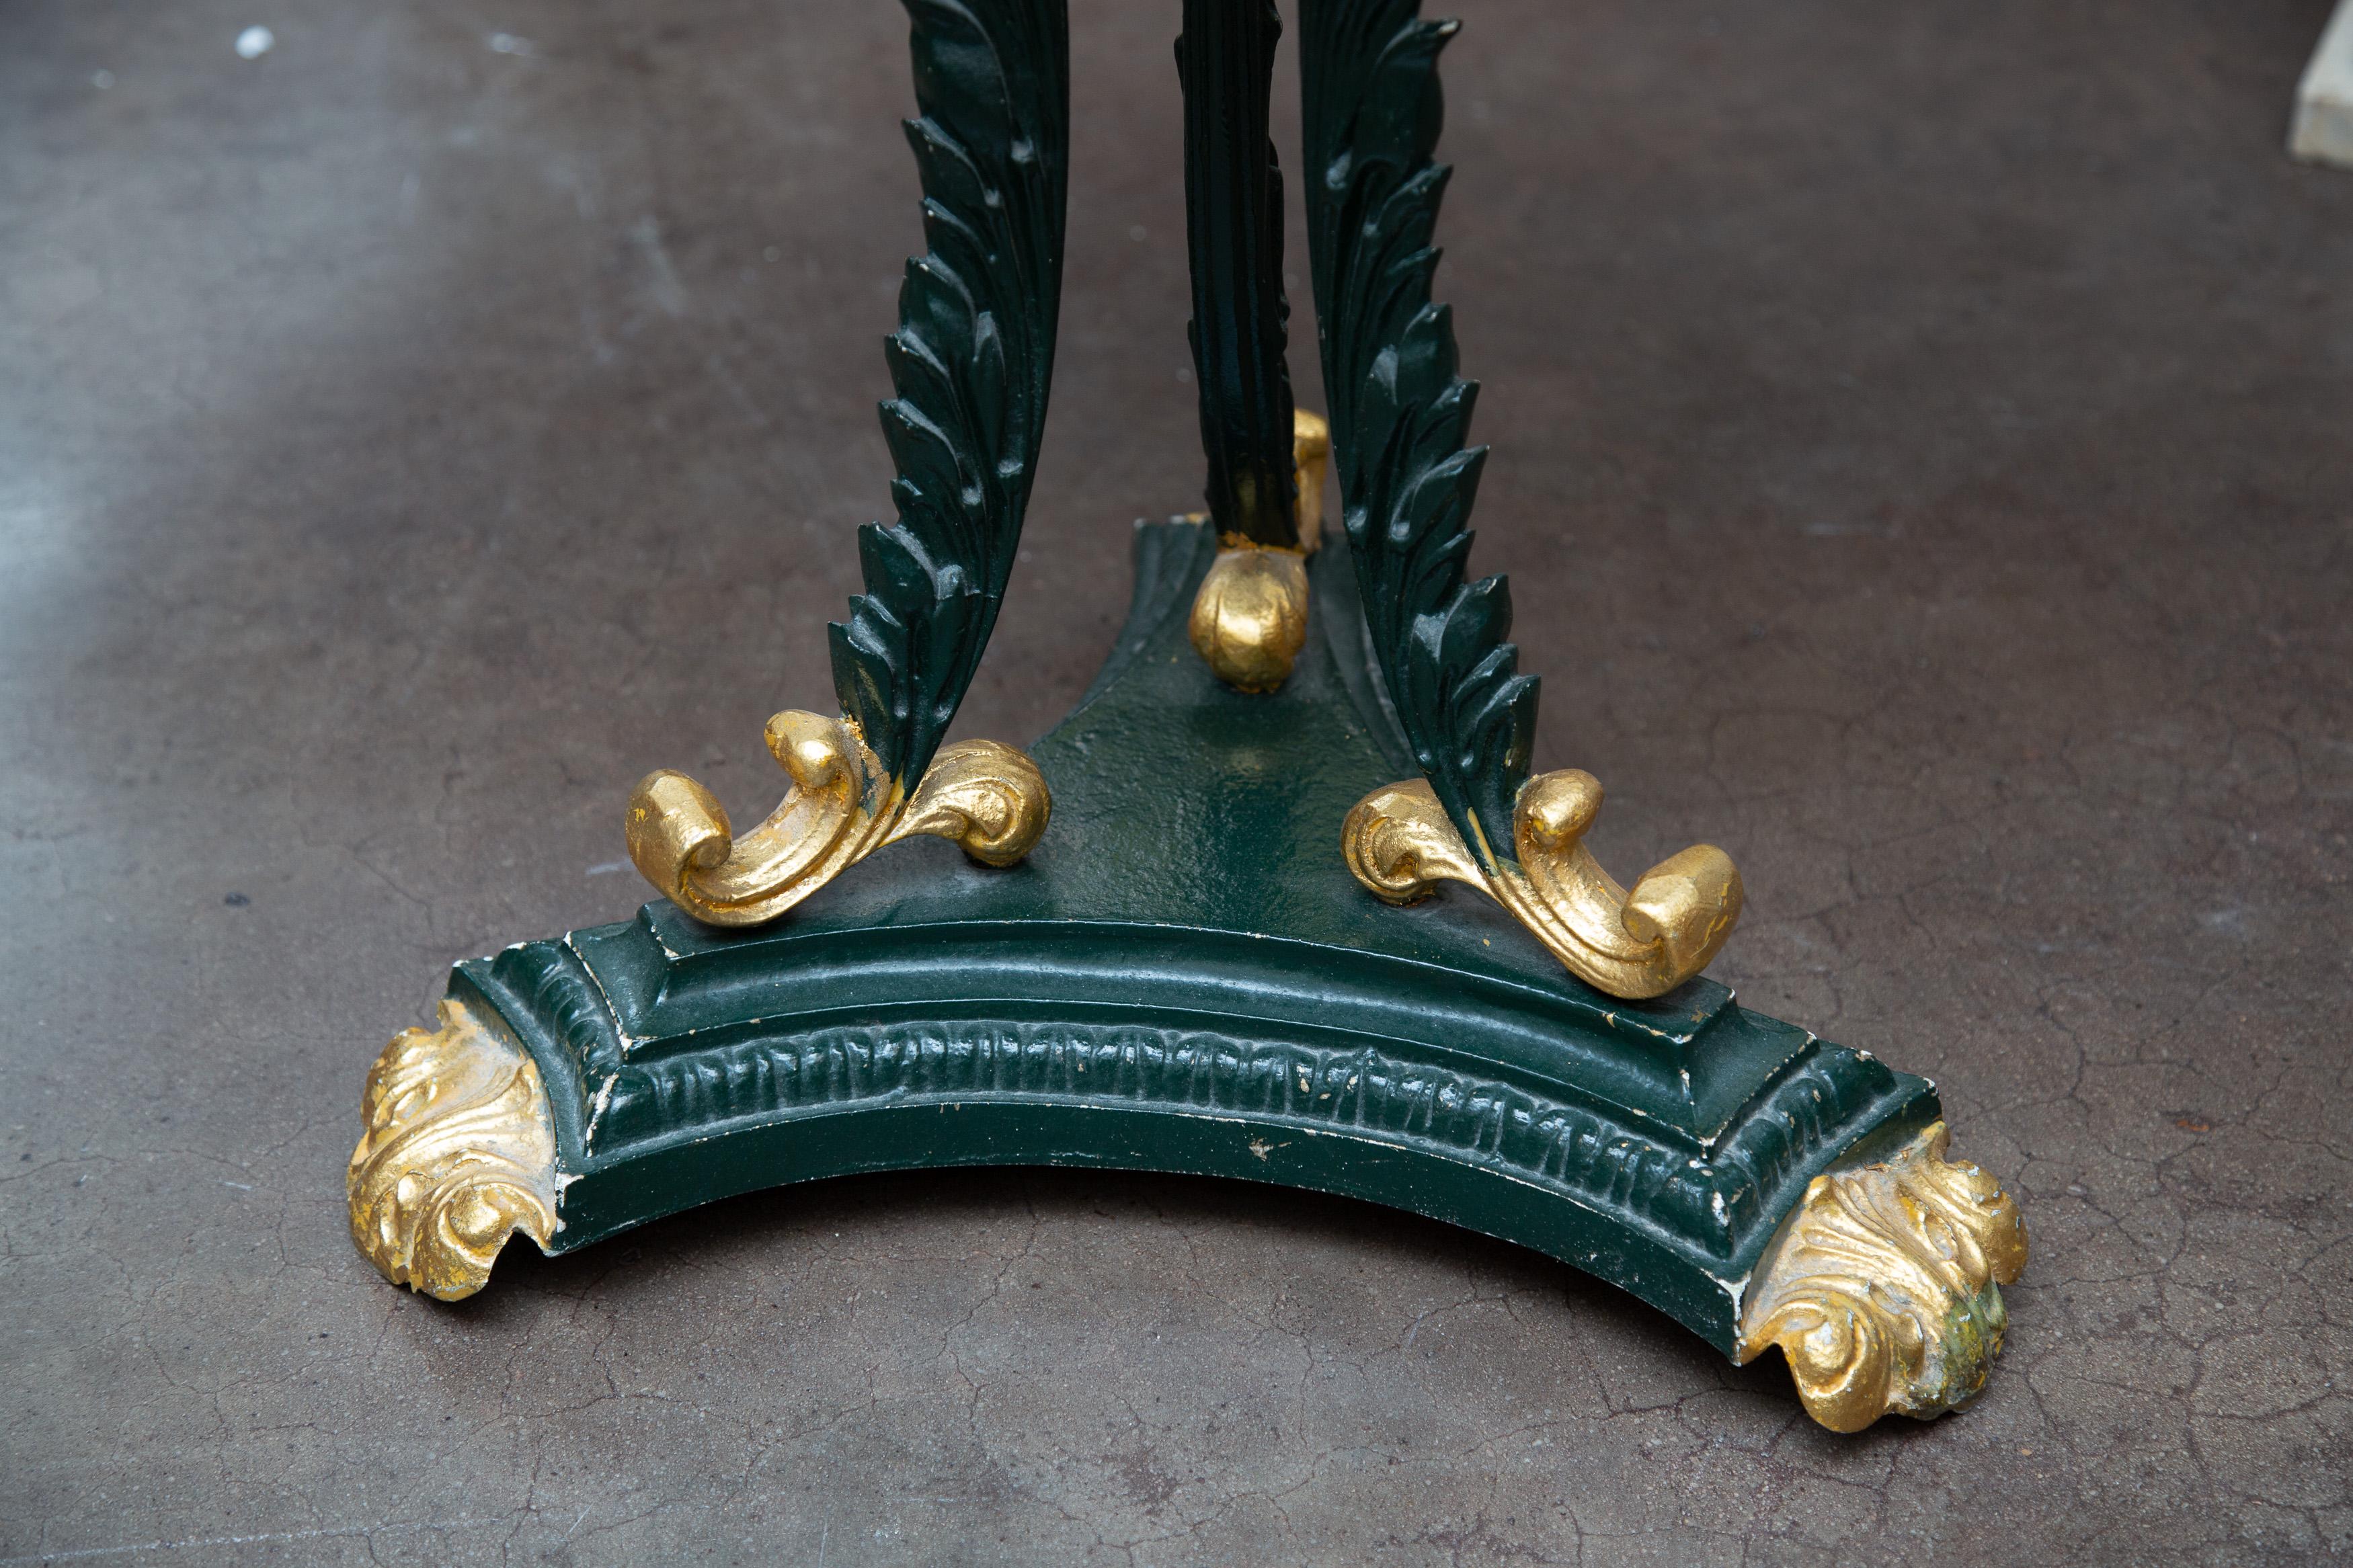 This is an attractive French green-painted and parcel gilt circular iron table. The travertine top is supported by three ornamental out-scrolling fronds situated on a triangular base.